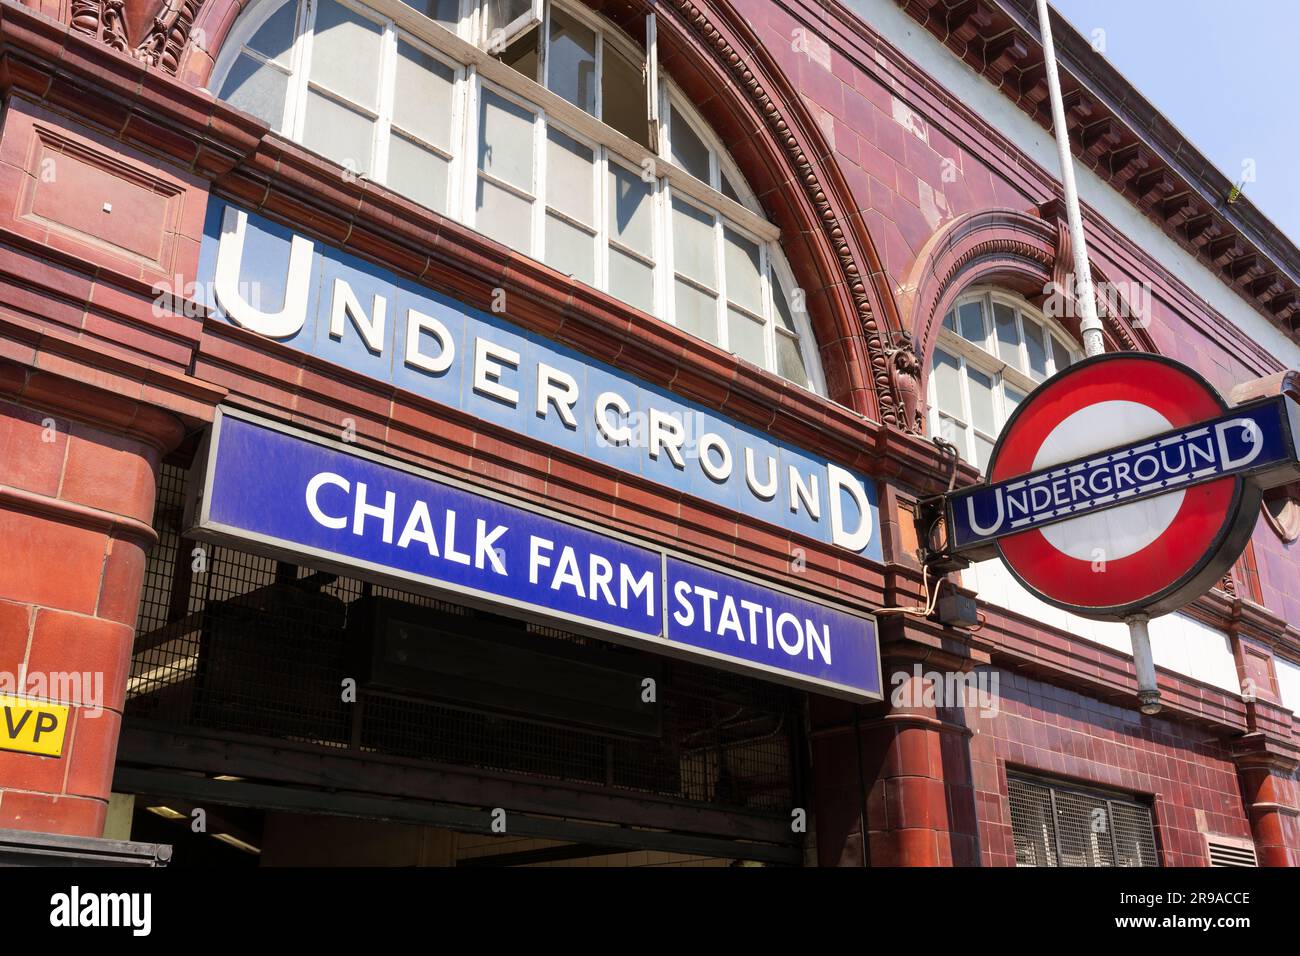 The Grade II listed front facade of Chalk Farm underground station with the station name and the famous London Underground roundel symbol. London, UK Stock Photo